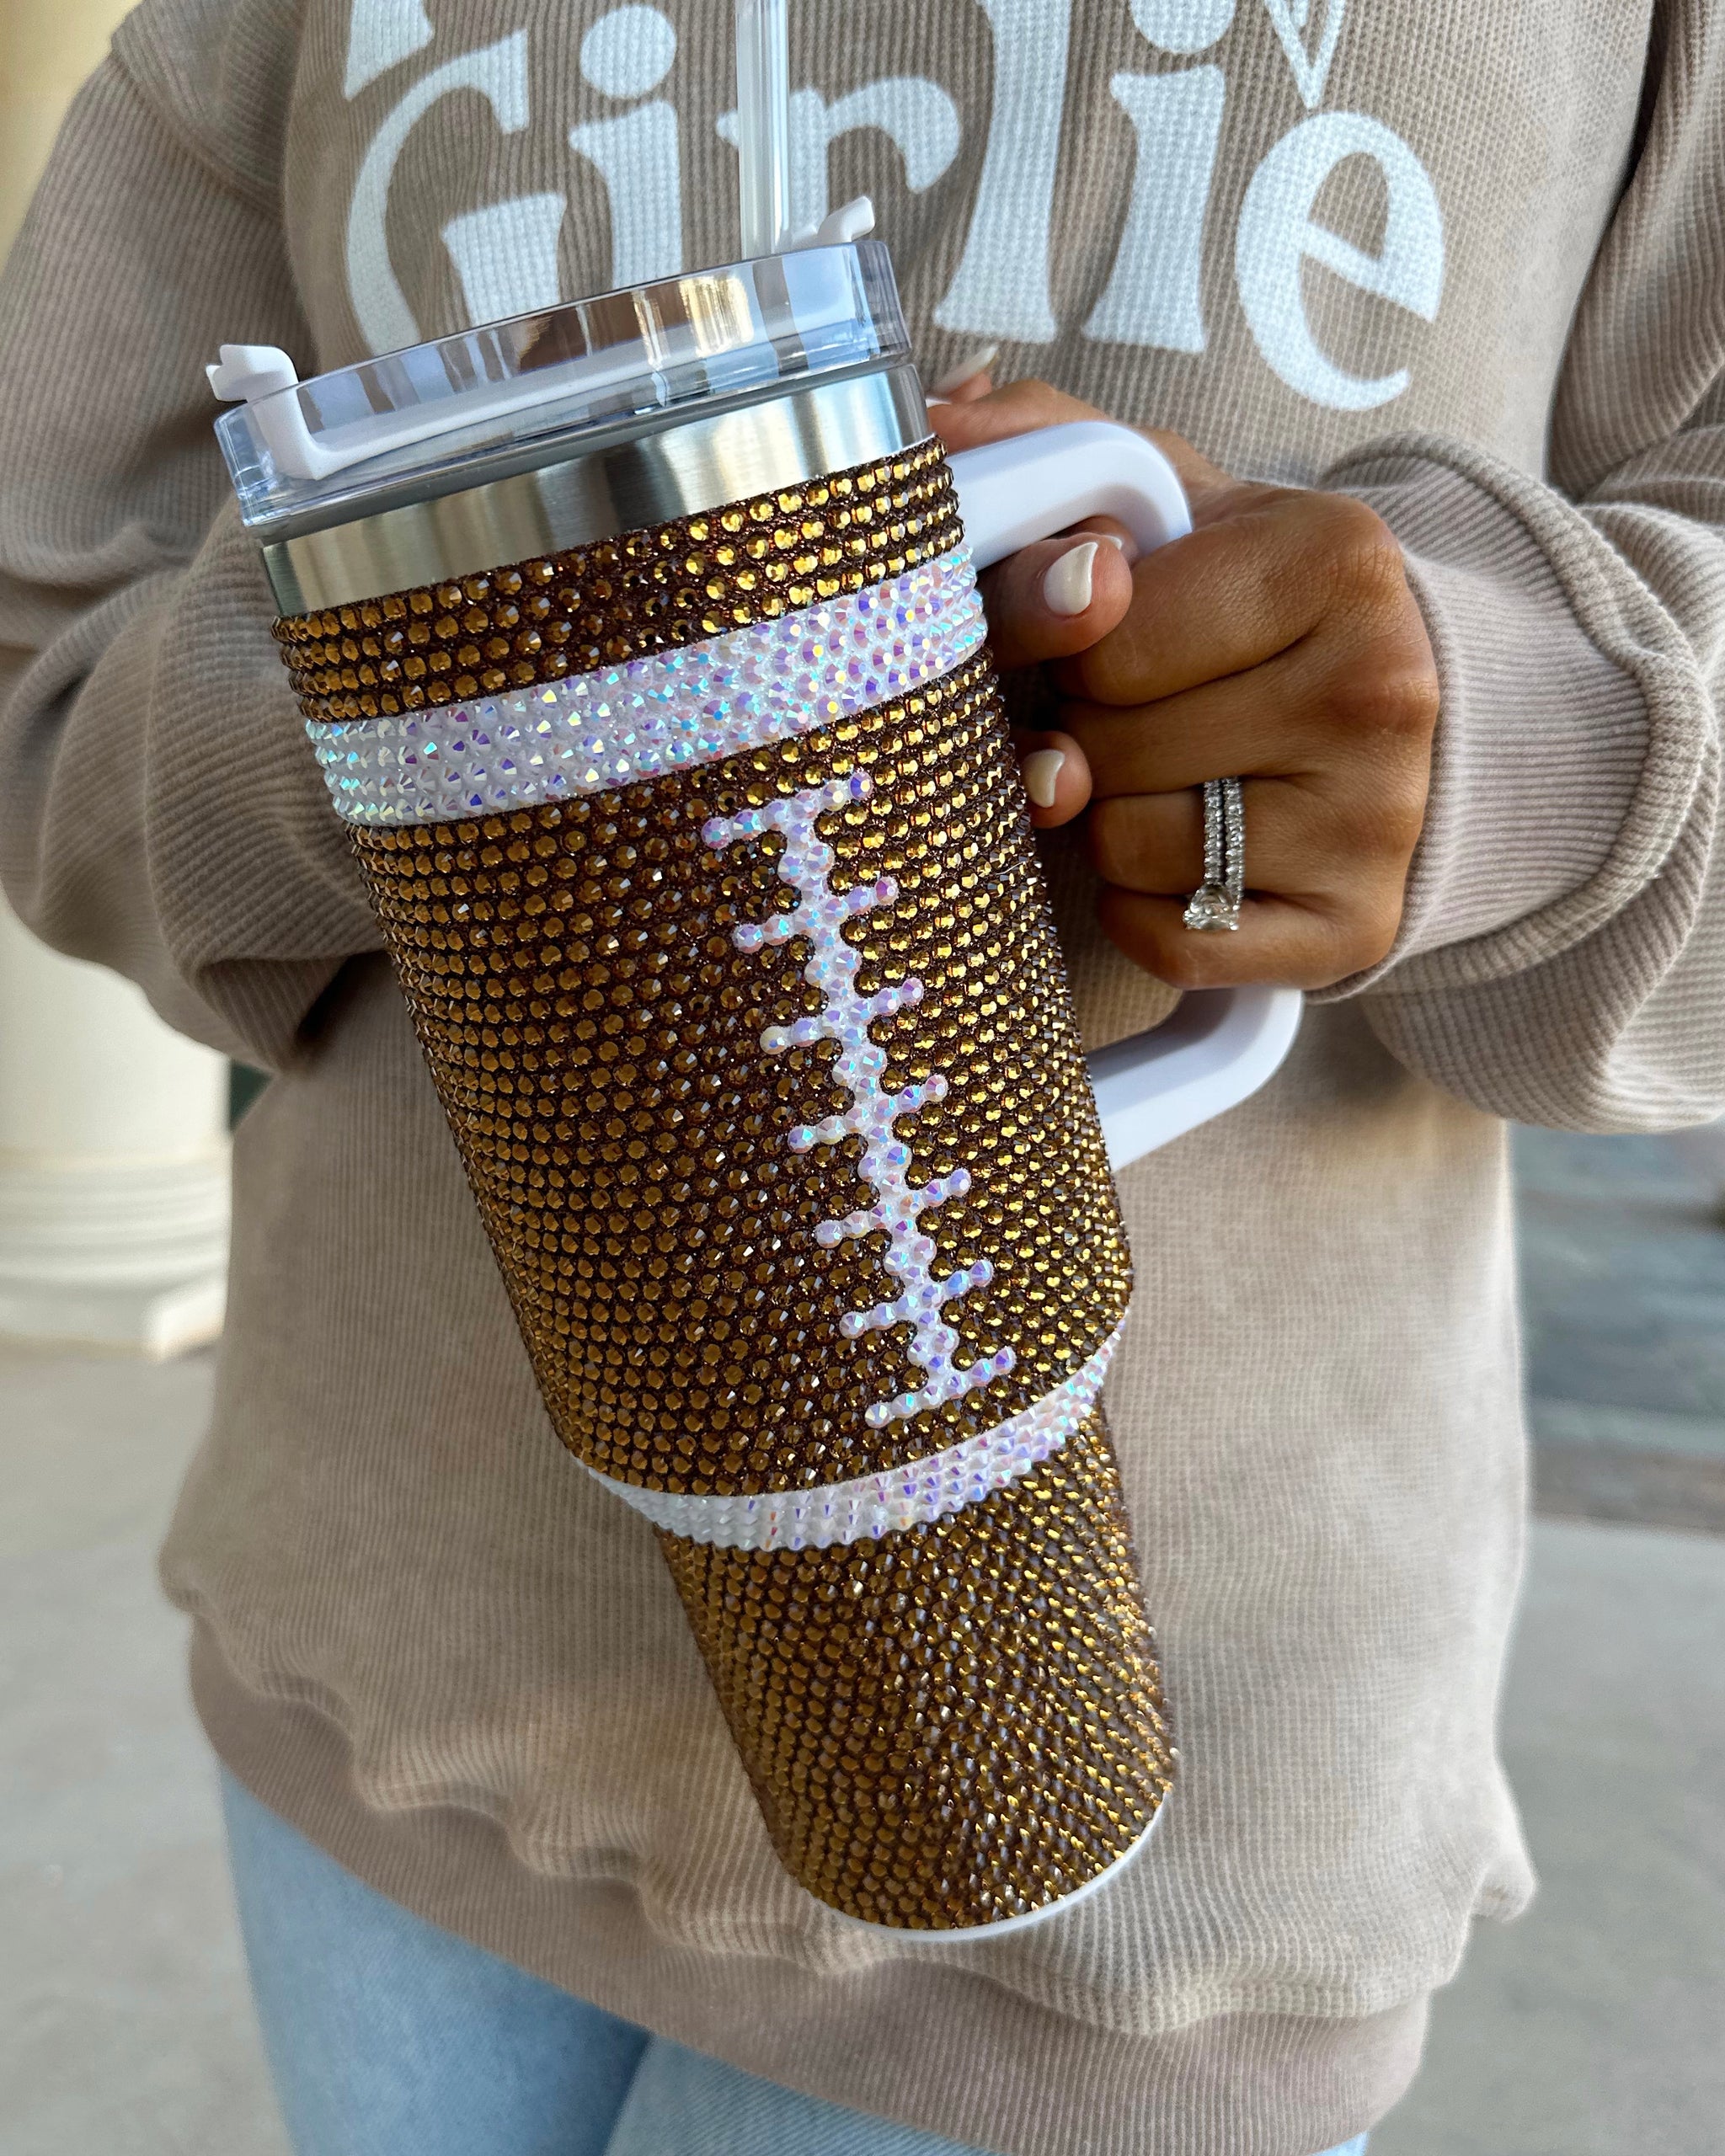 40 oz Stanley cup BLINGED OUT